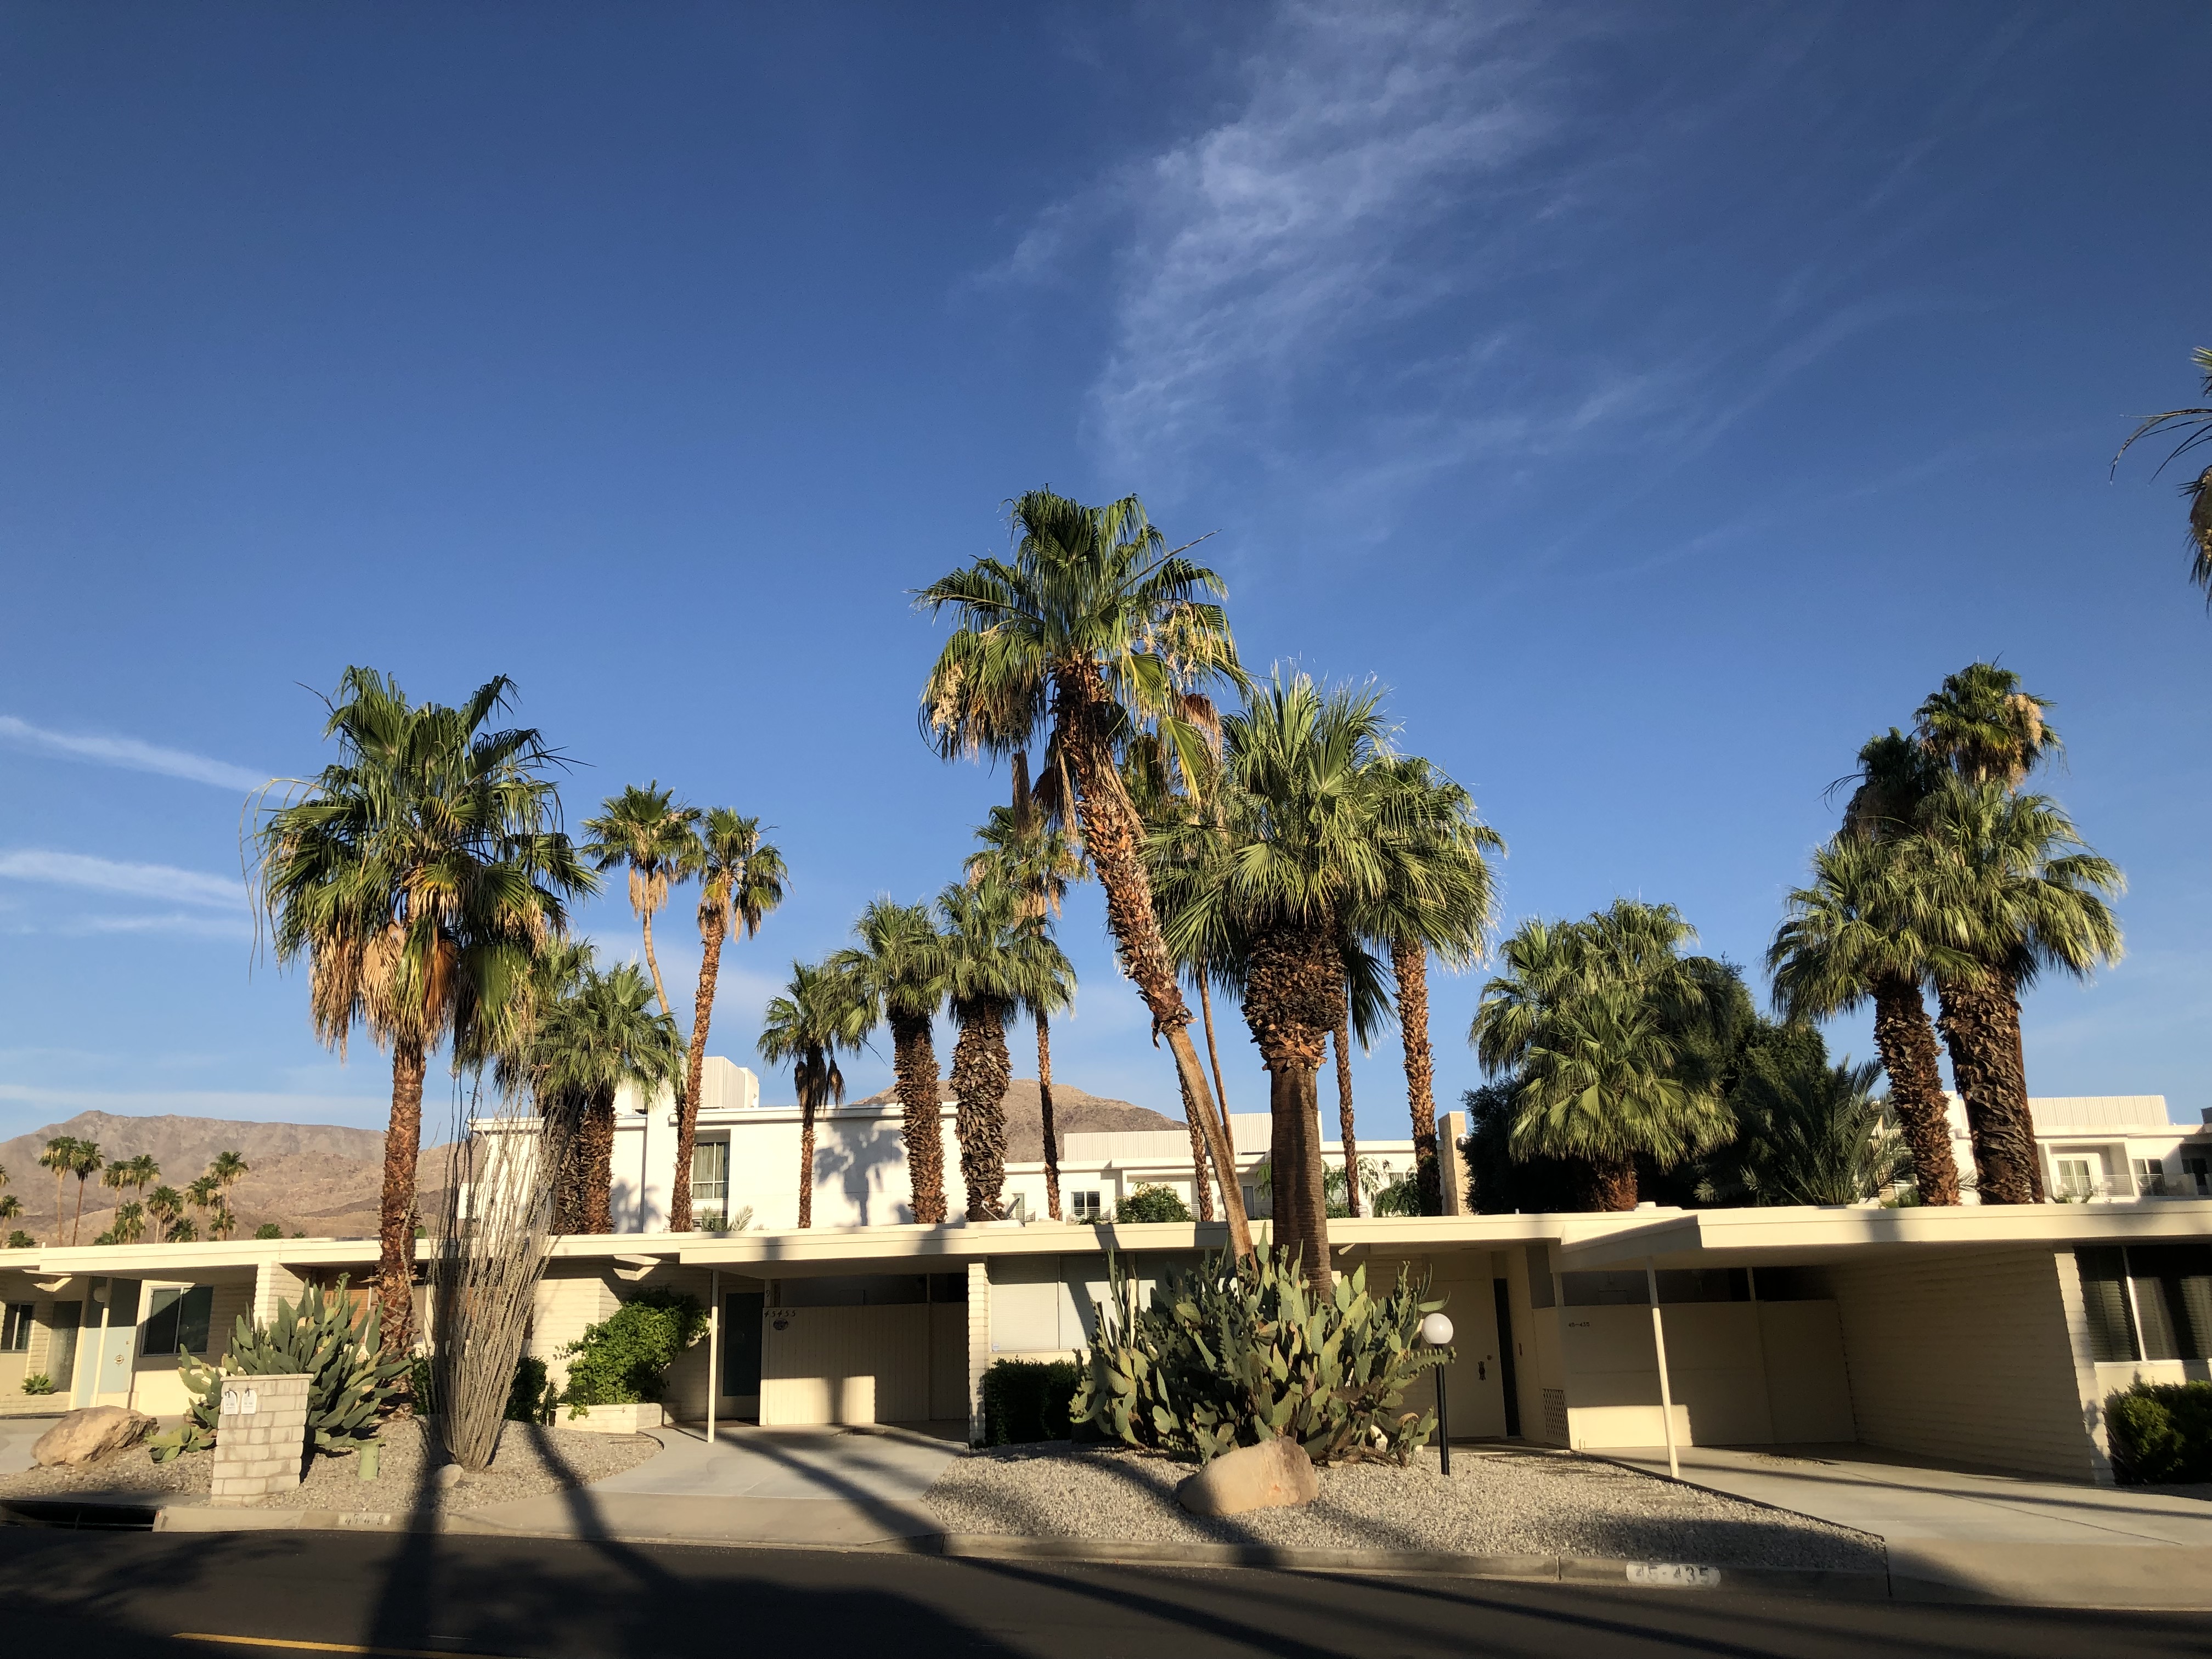 Top Five Things To Do in Palm Springs